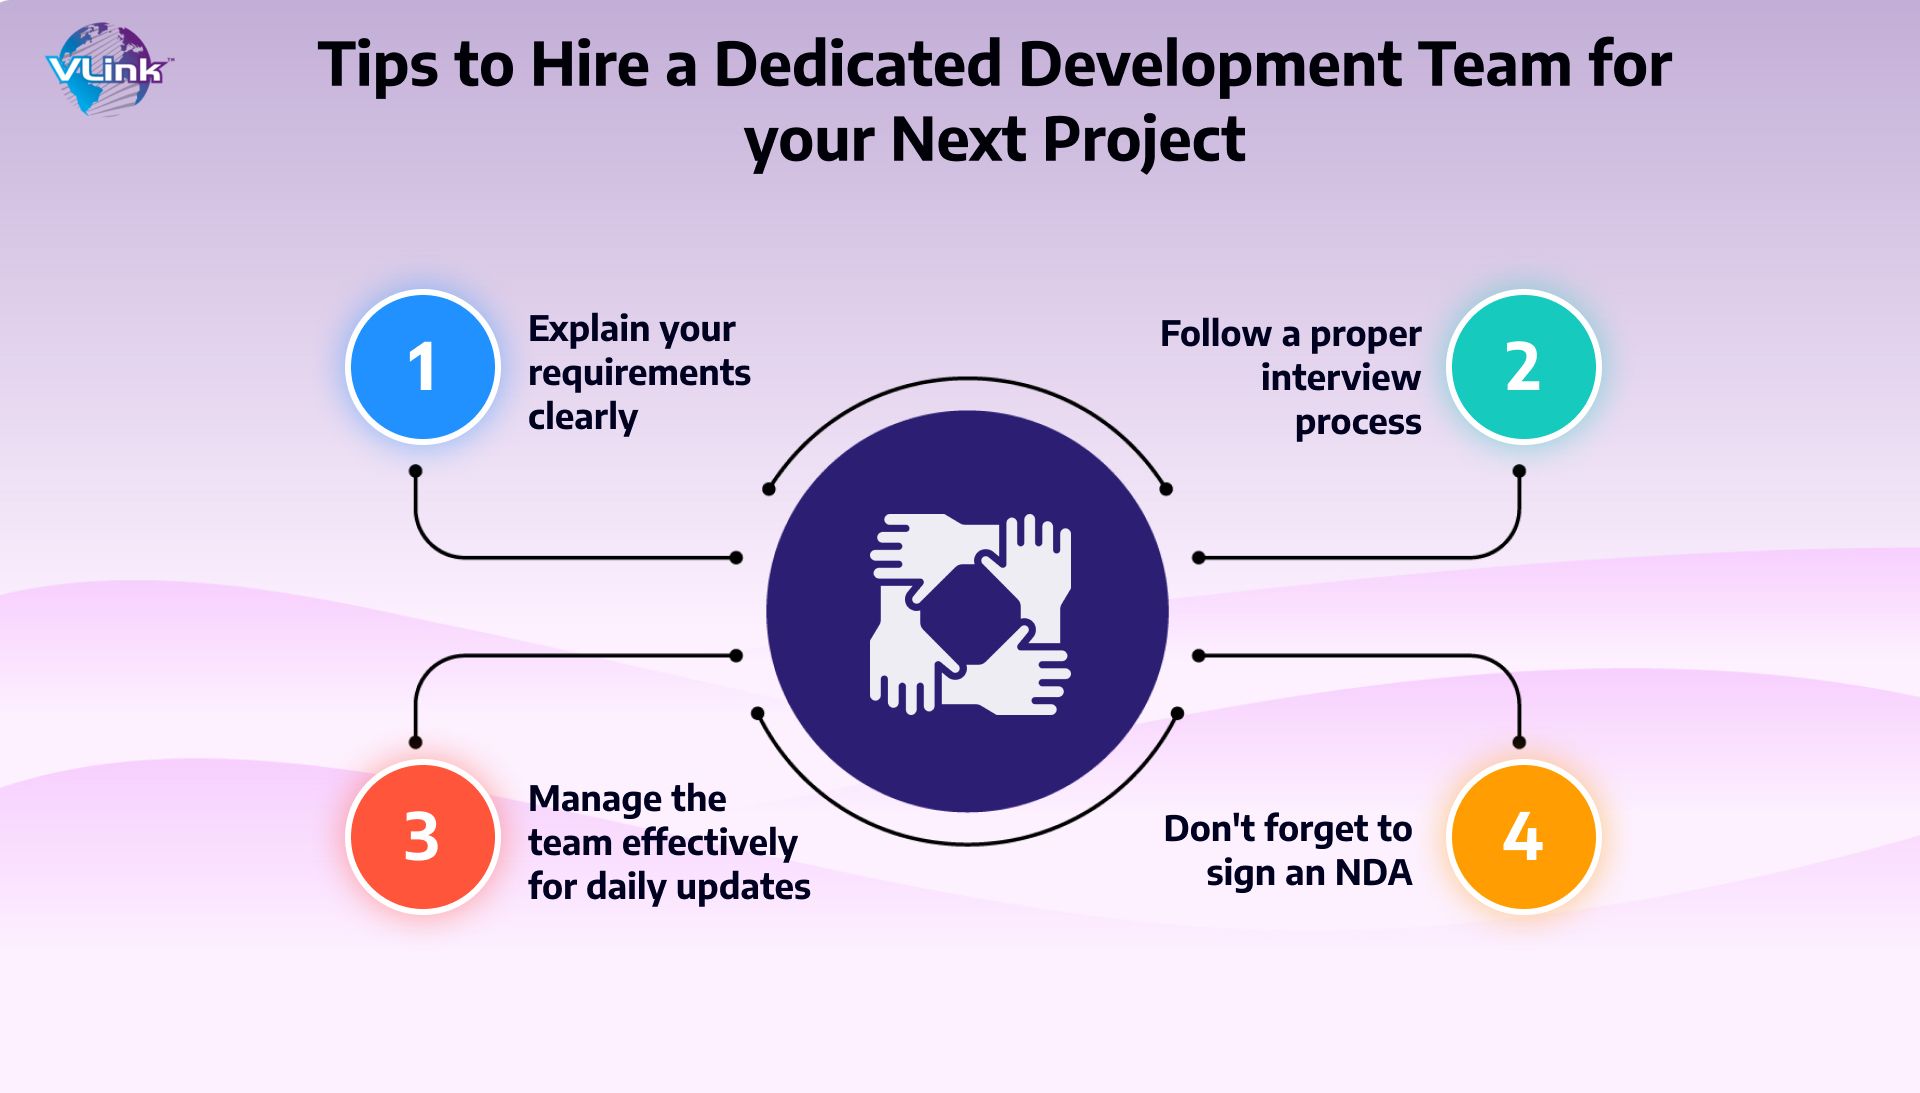 Tips for Hiring a Dedicated Development Team for Your Next Project 